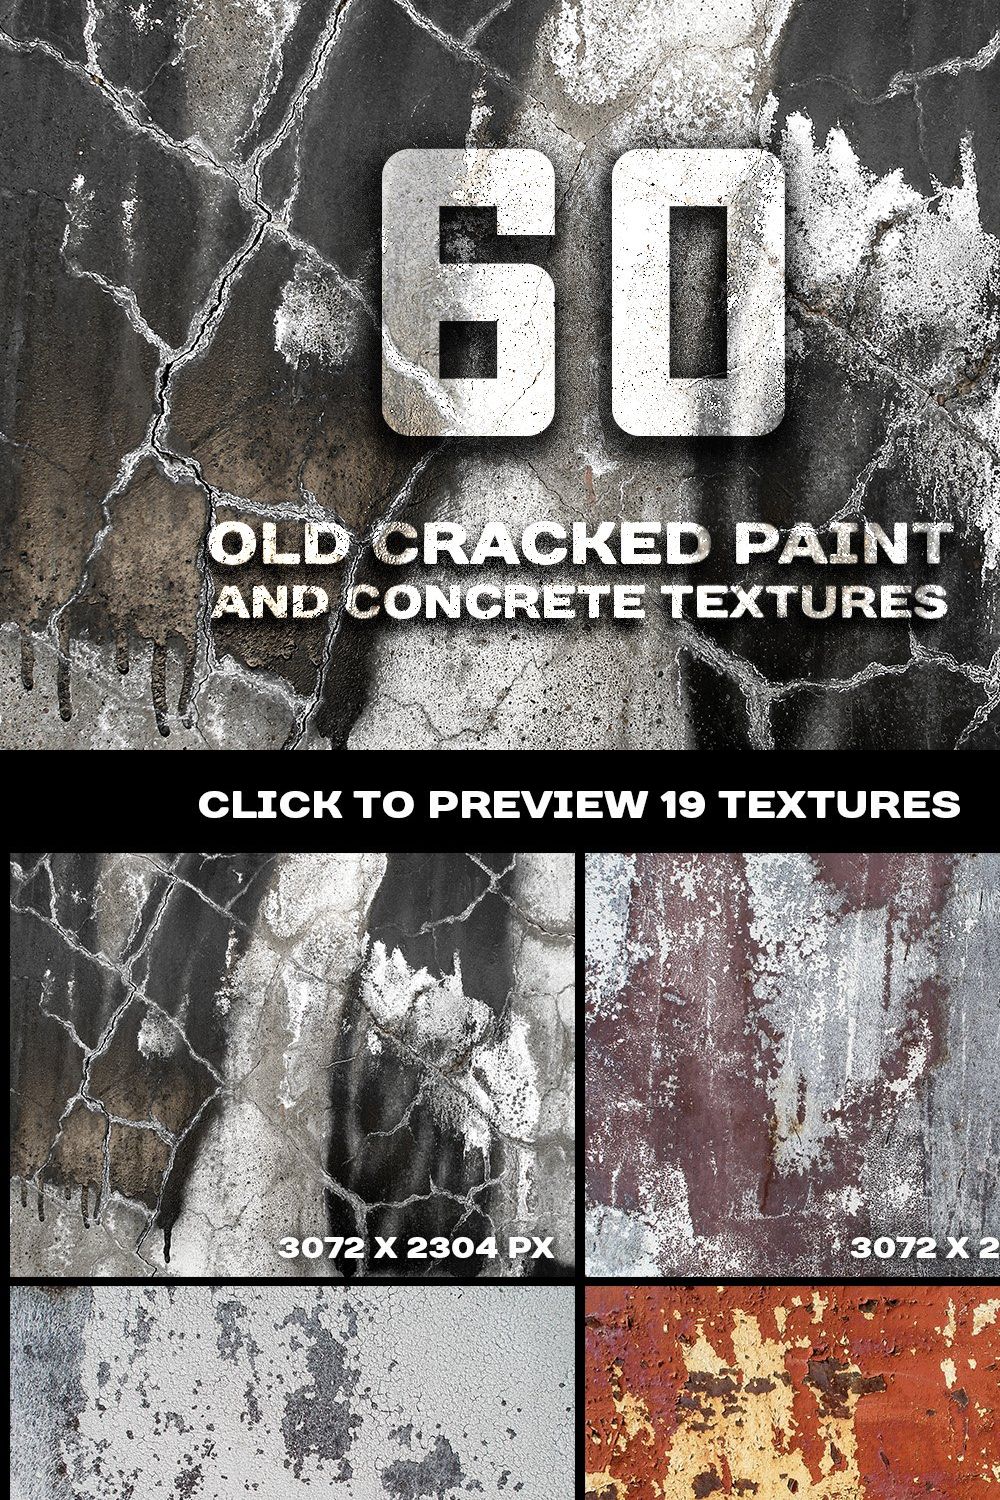 Cracked paint and concrete textures pinterest preview image.